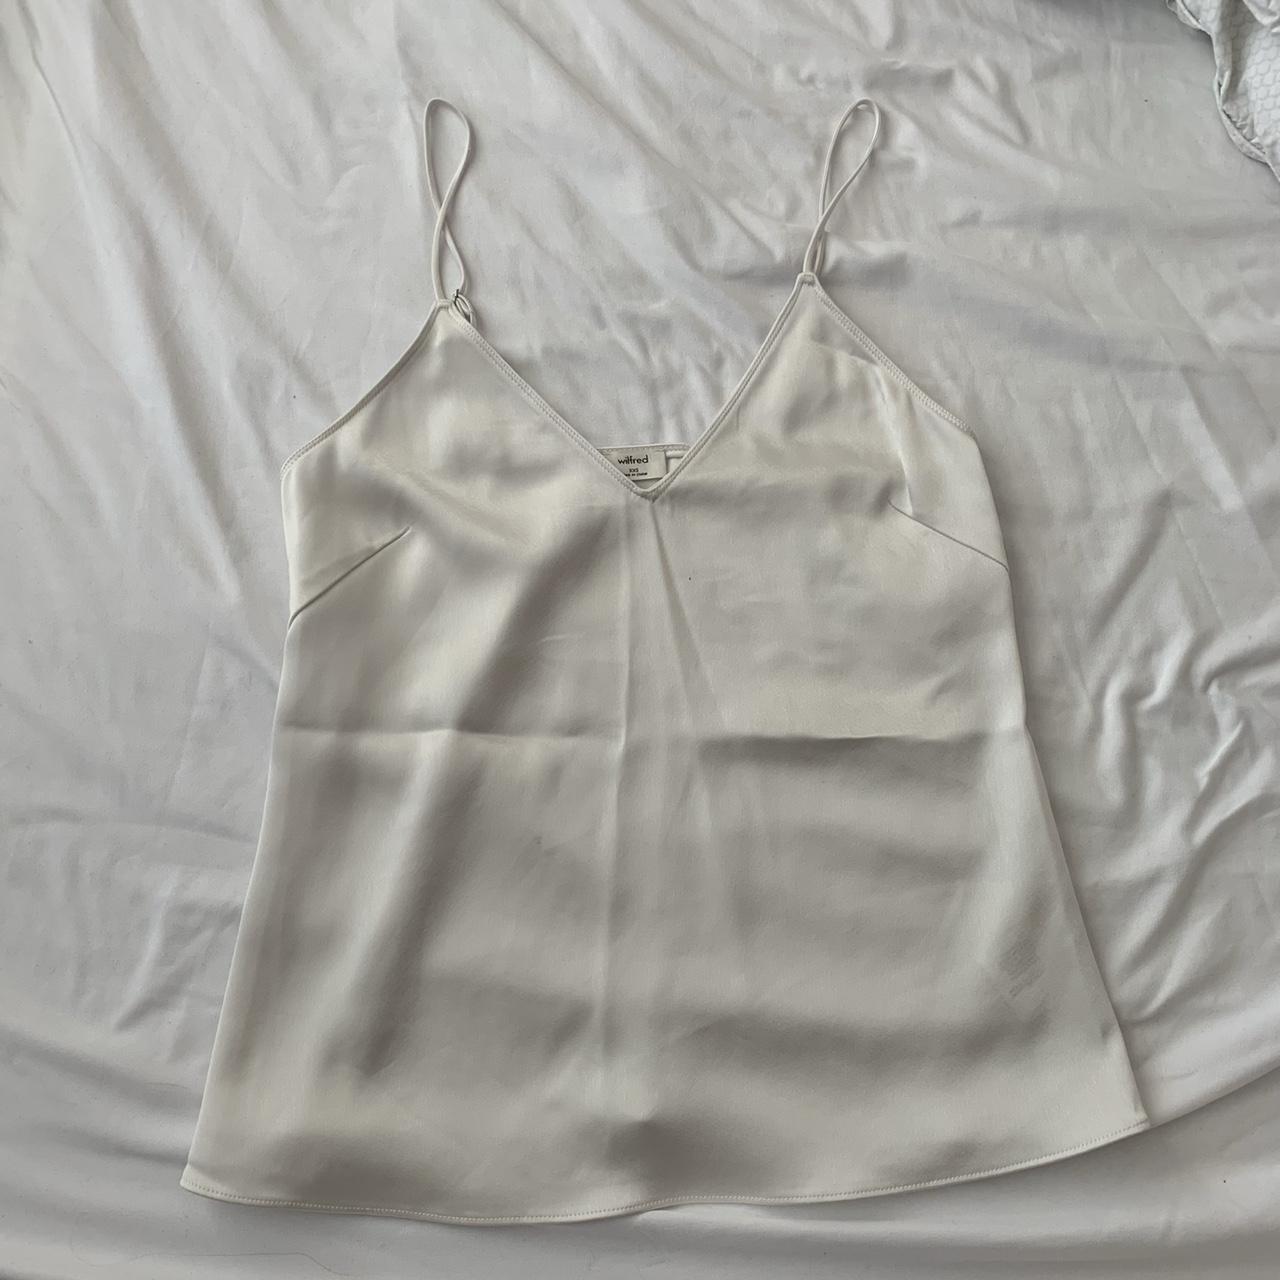 Aritzia Wilfred Satin Top Brand new without... - Depop